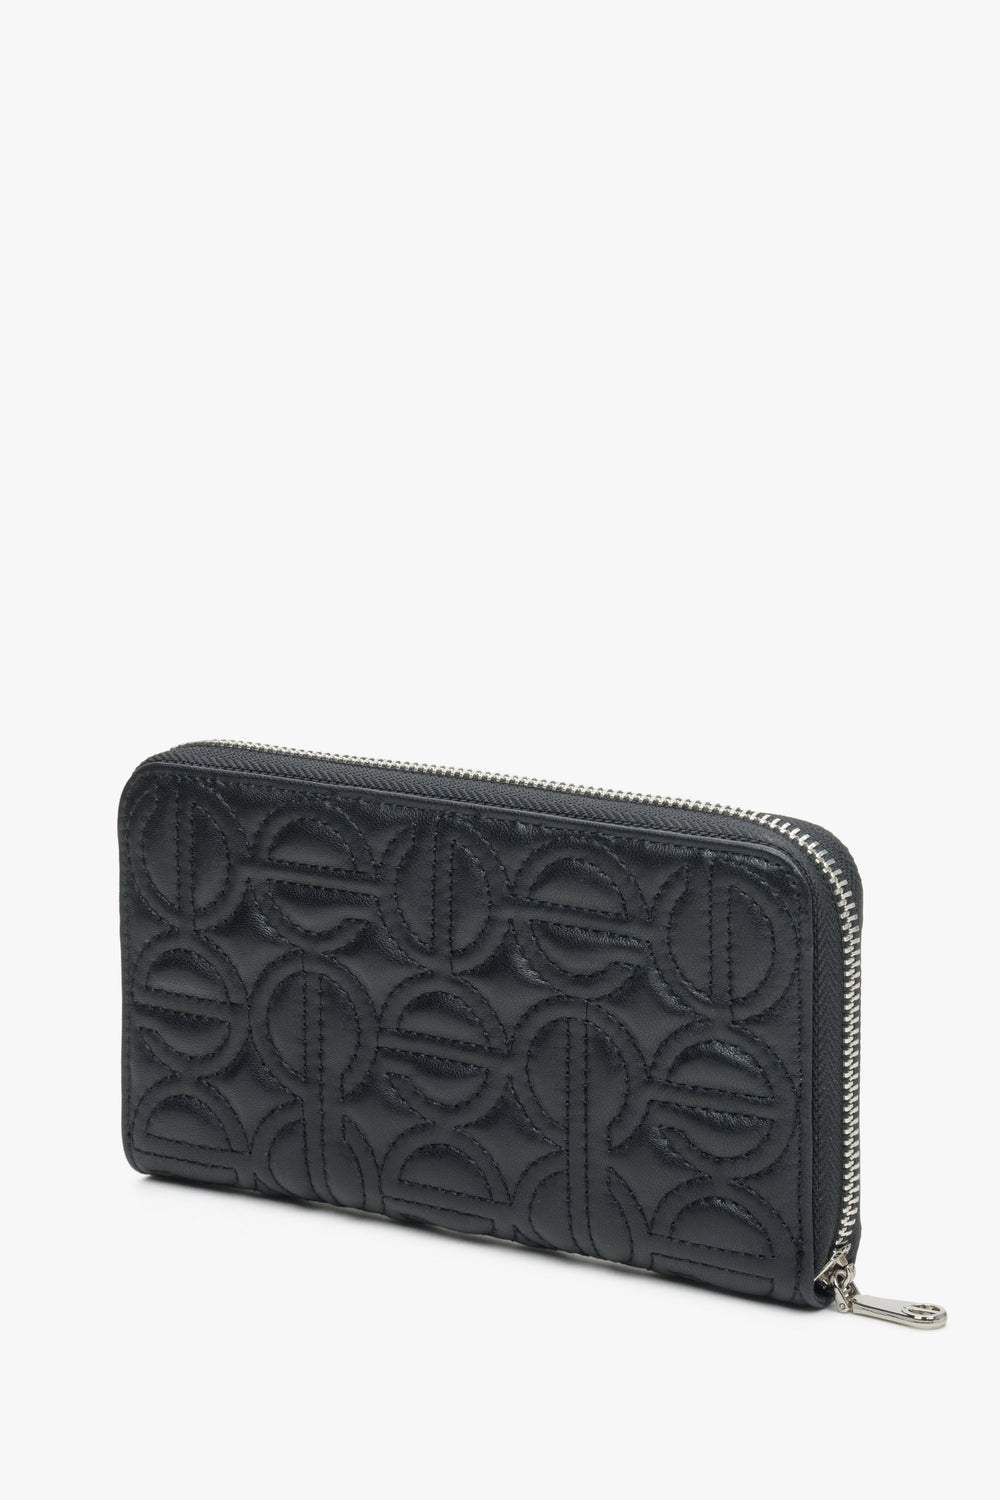 Large black women's continental wallet with a zipper by Estro.